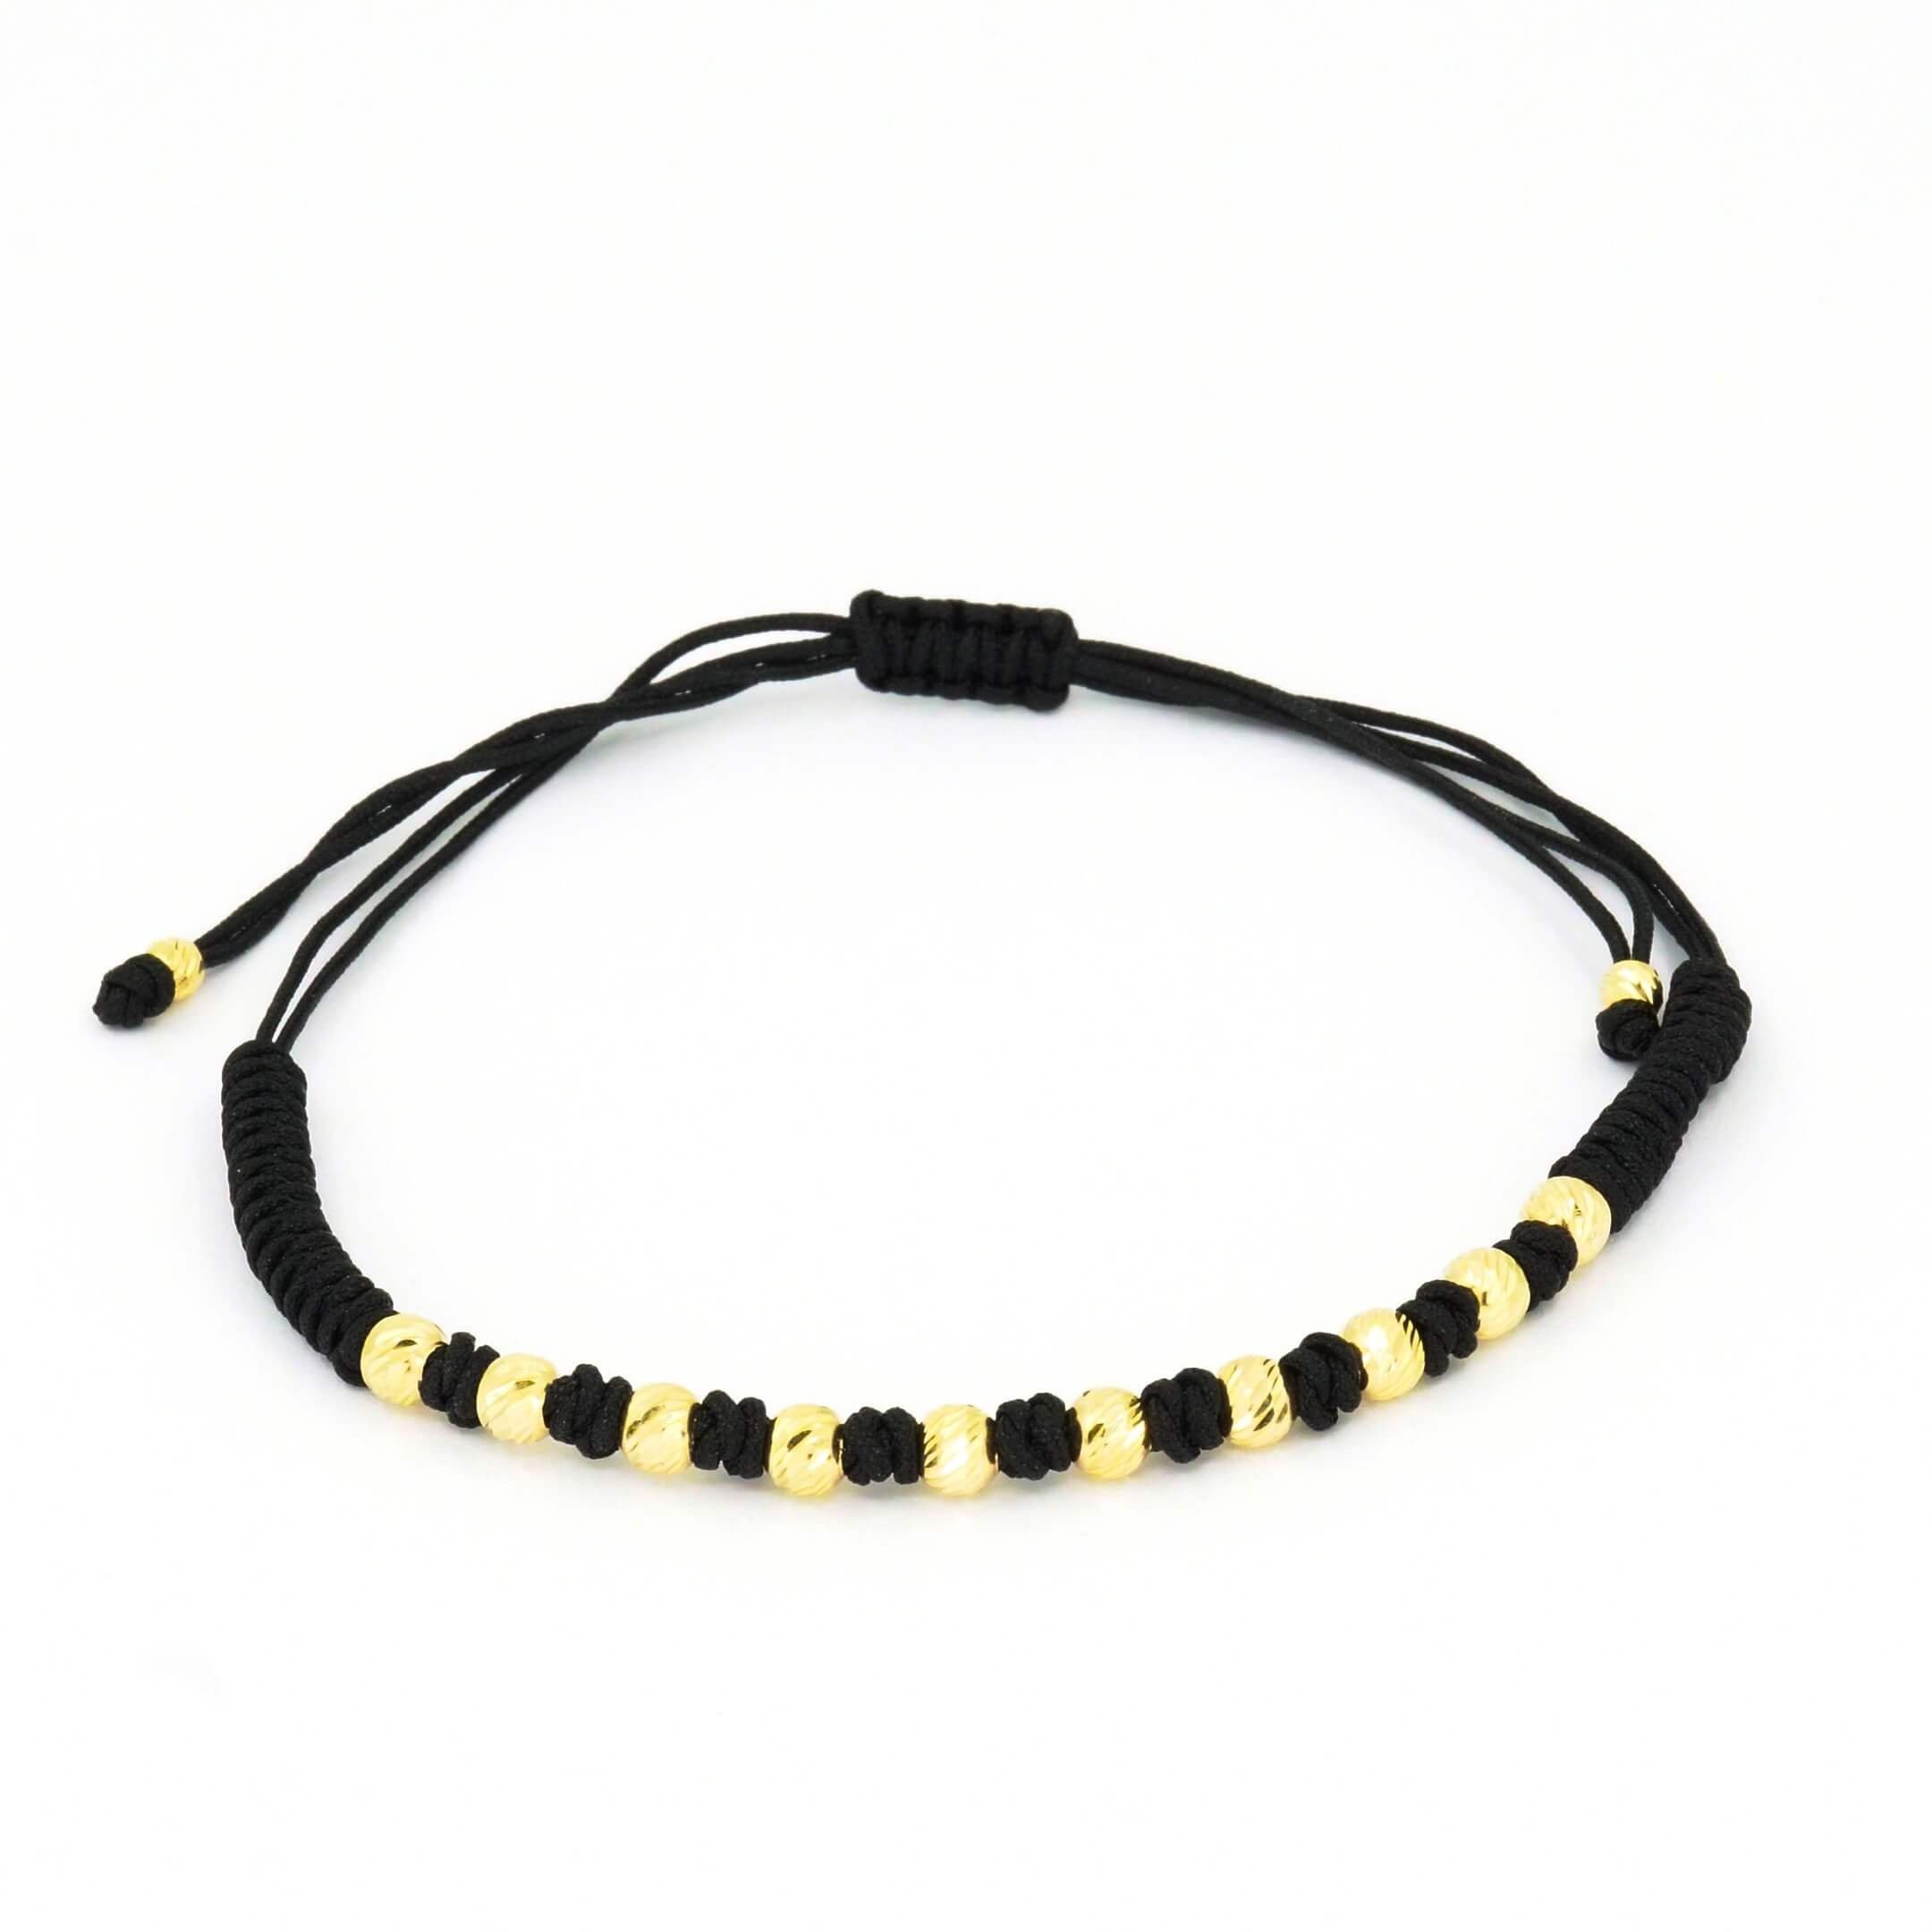 Black cord bracelet with 14K yellow gold